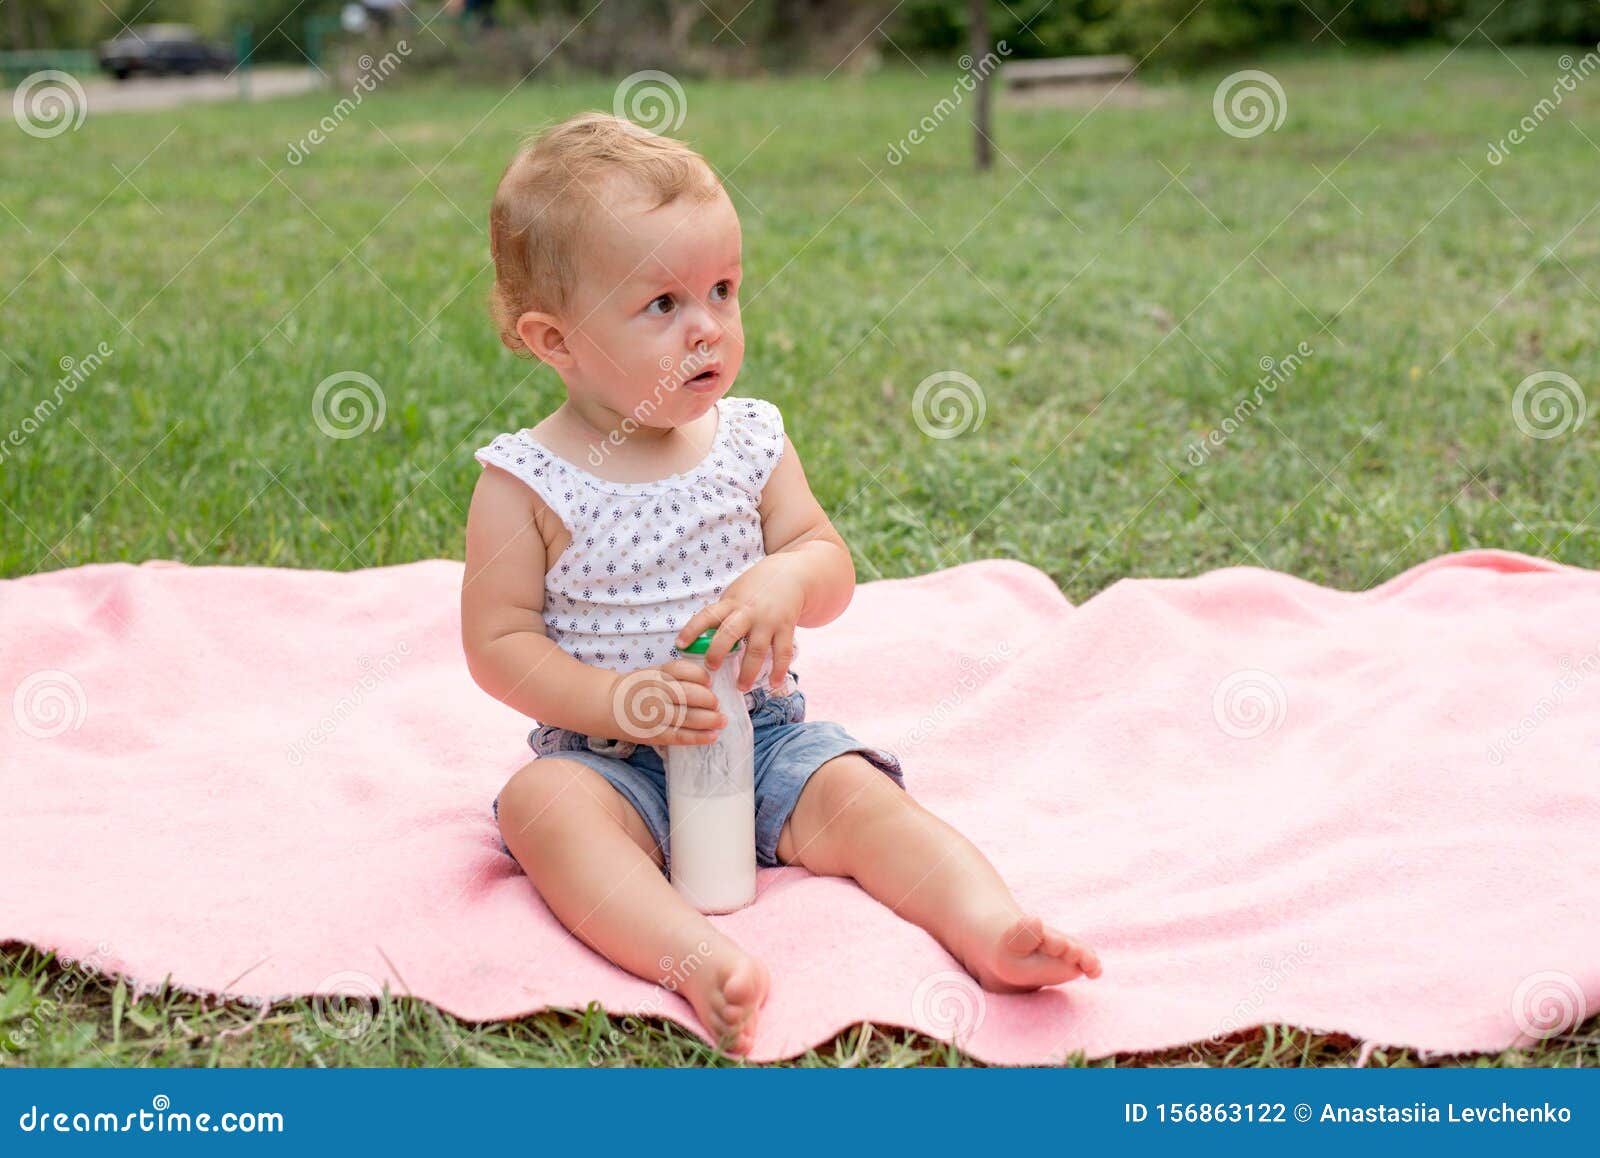 Baby Holding Bottle With Milk Or Kefir, Kid In The Park On ...